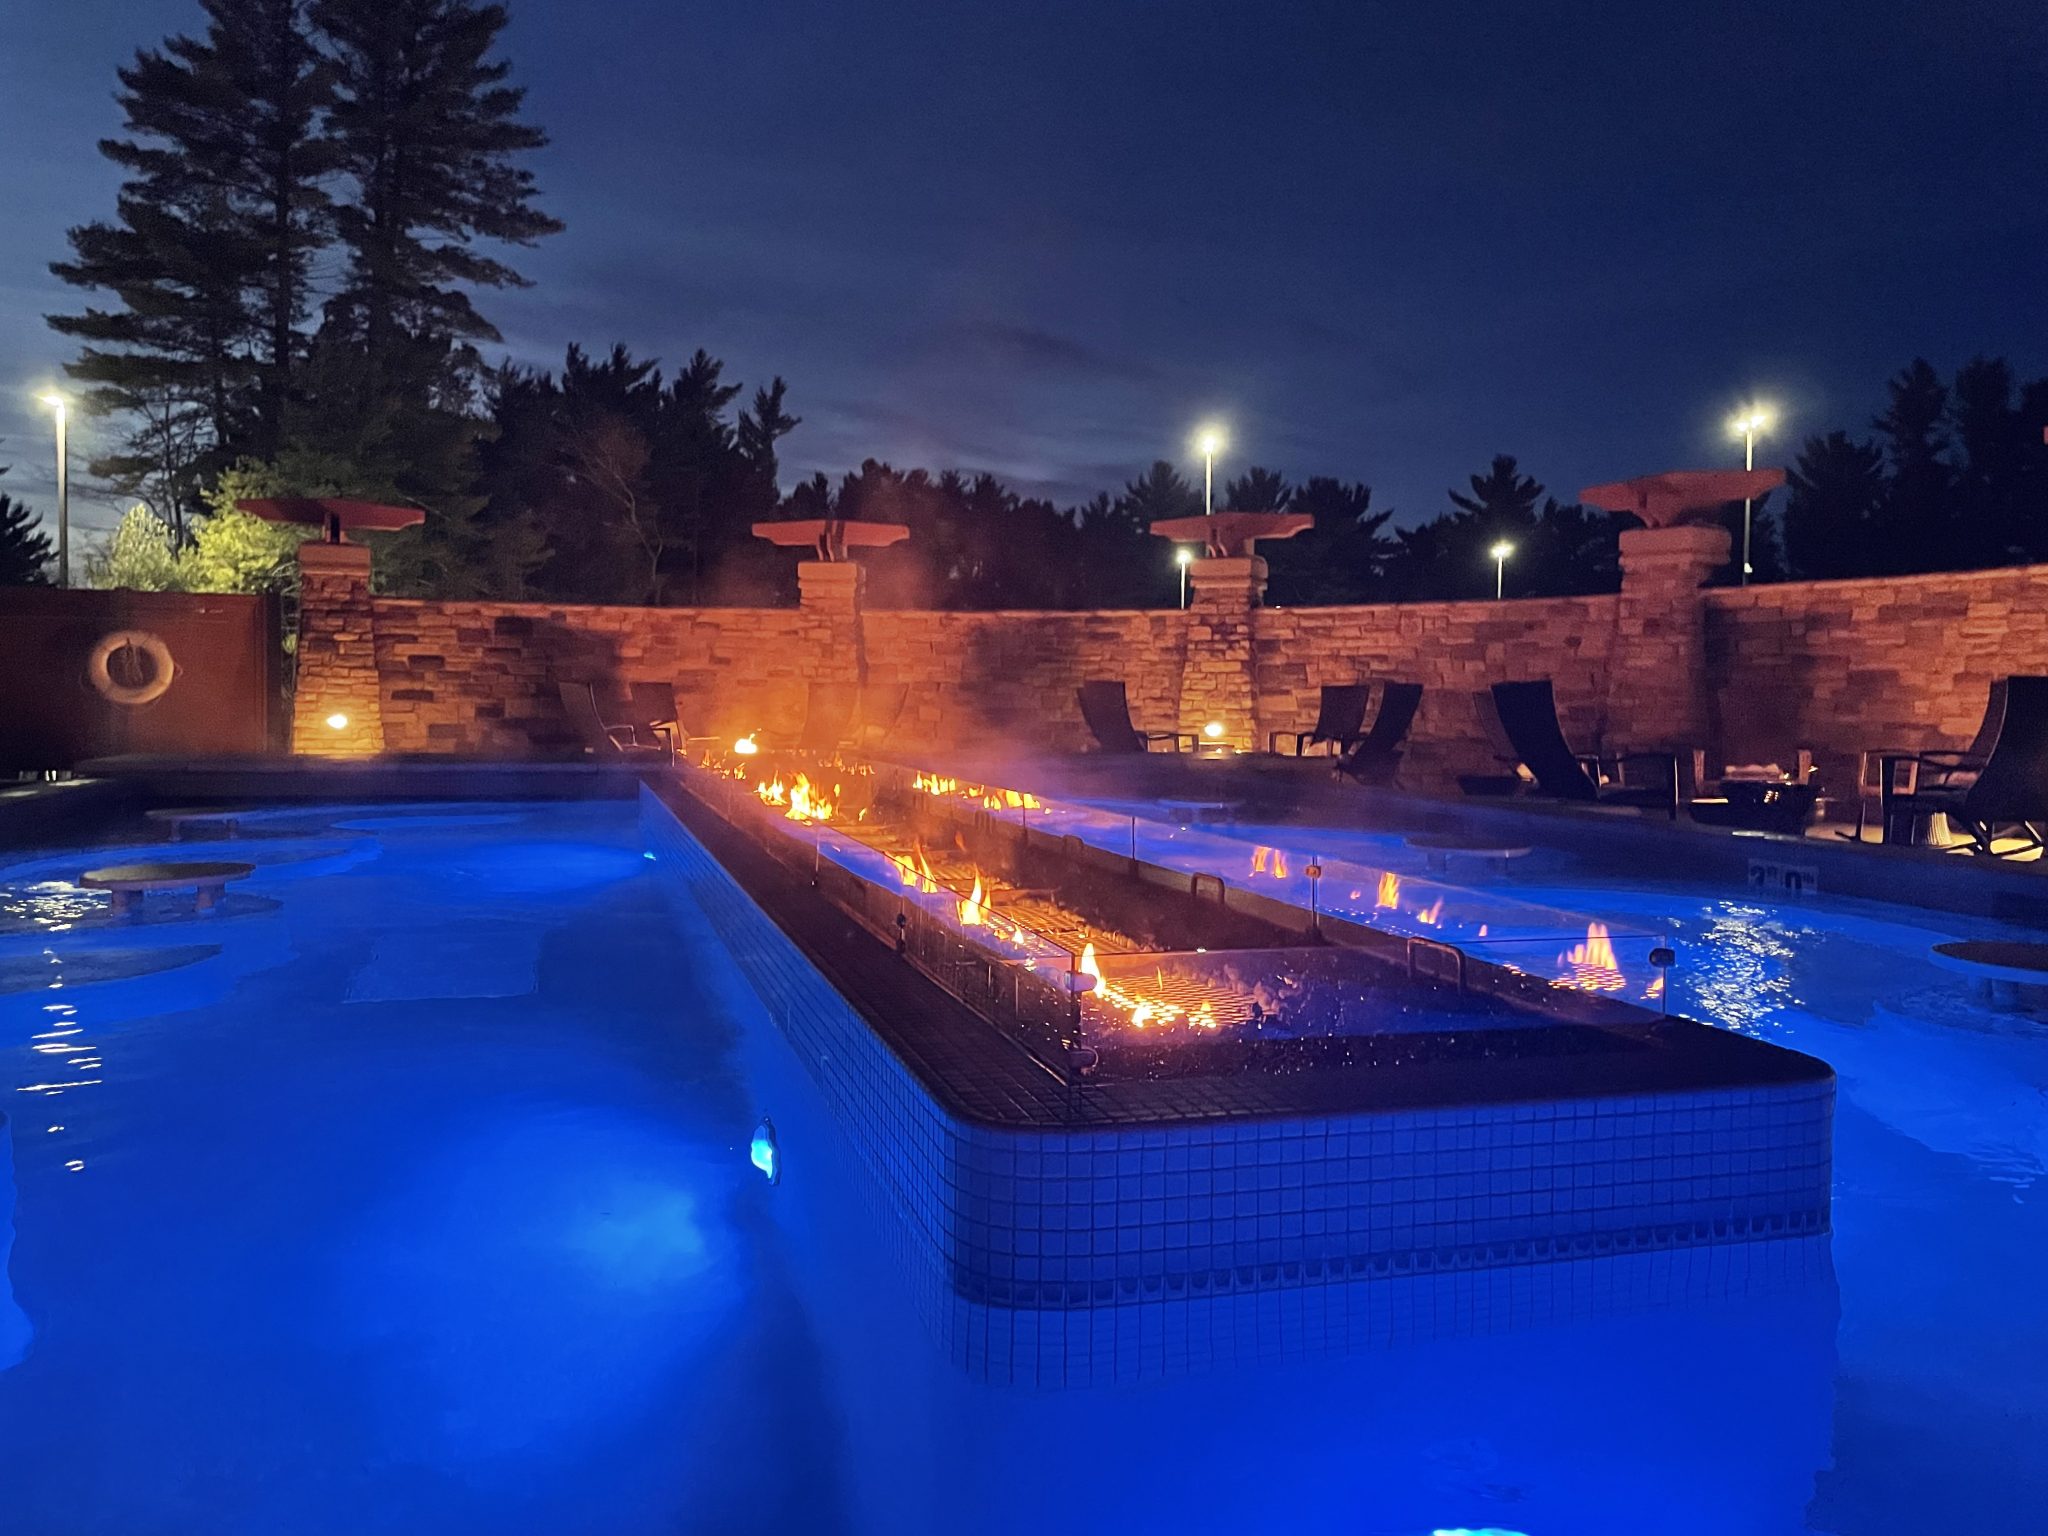 HONEST Sundara Inn & Spa Review – Is This Wisconsin Dells Resort Actually Worth It?